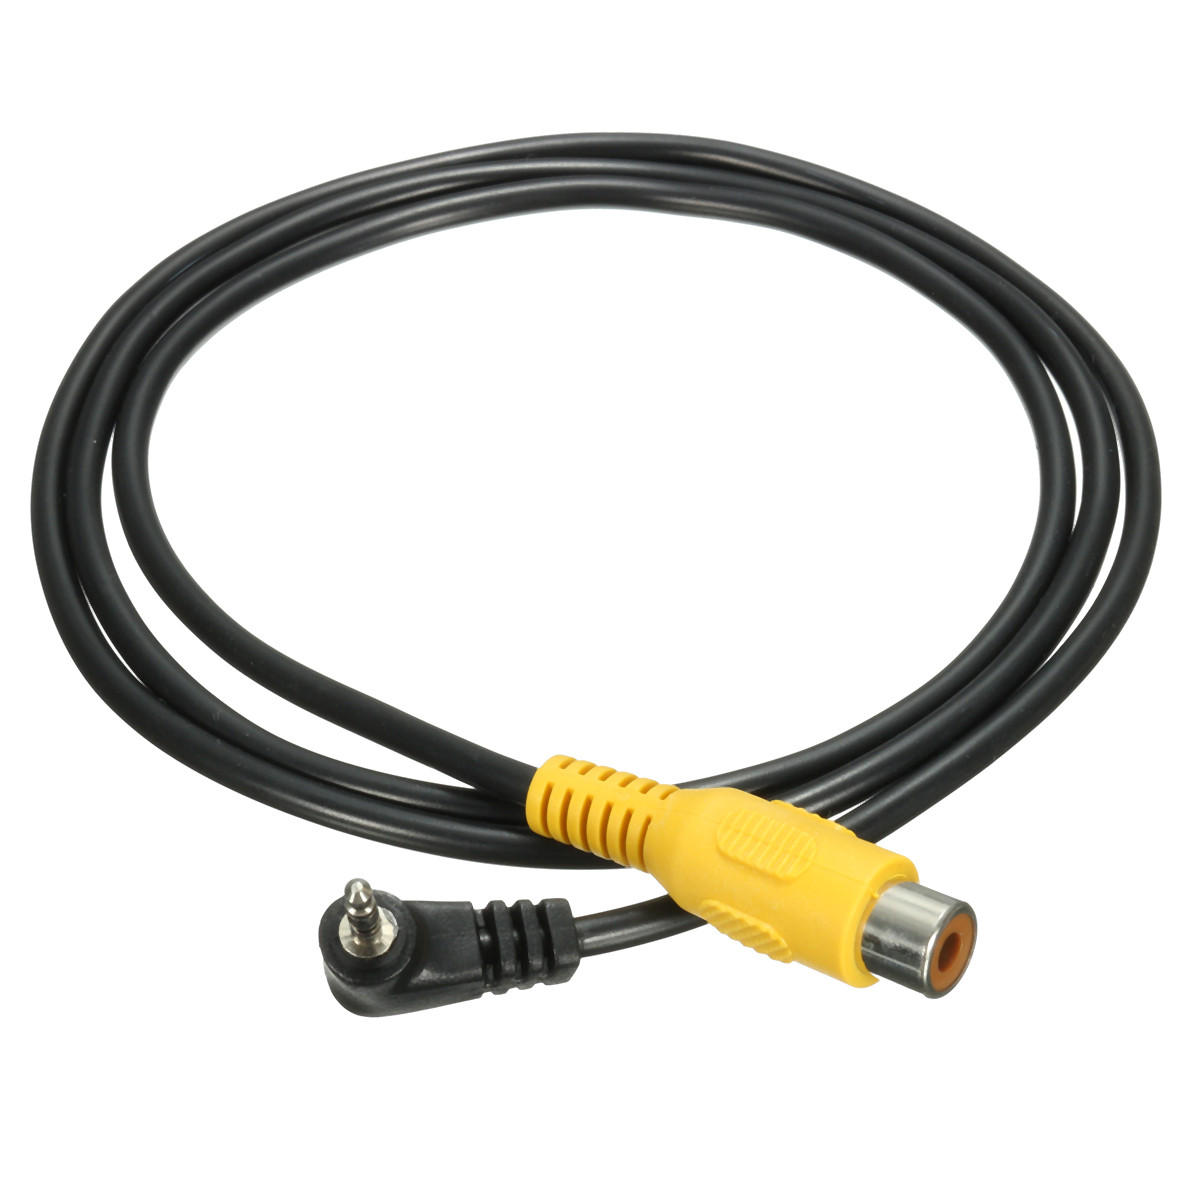 2.5mm Stereo Jack Plug Male to RCA 3.5mm Female Adapter For GPS AV-in Converter Video Cable